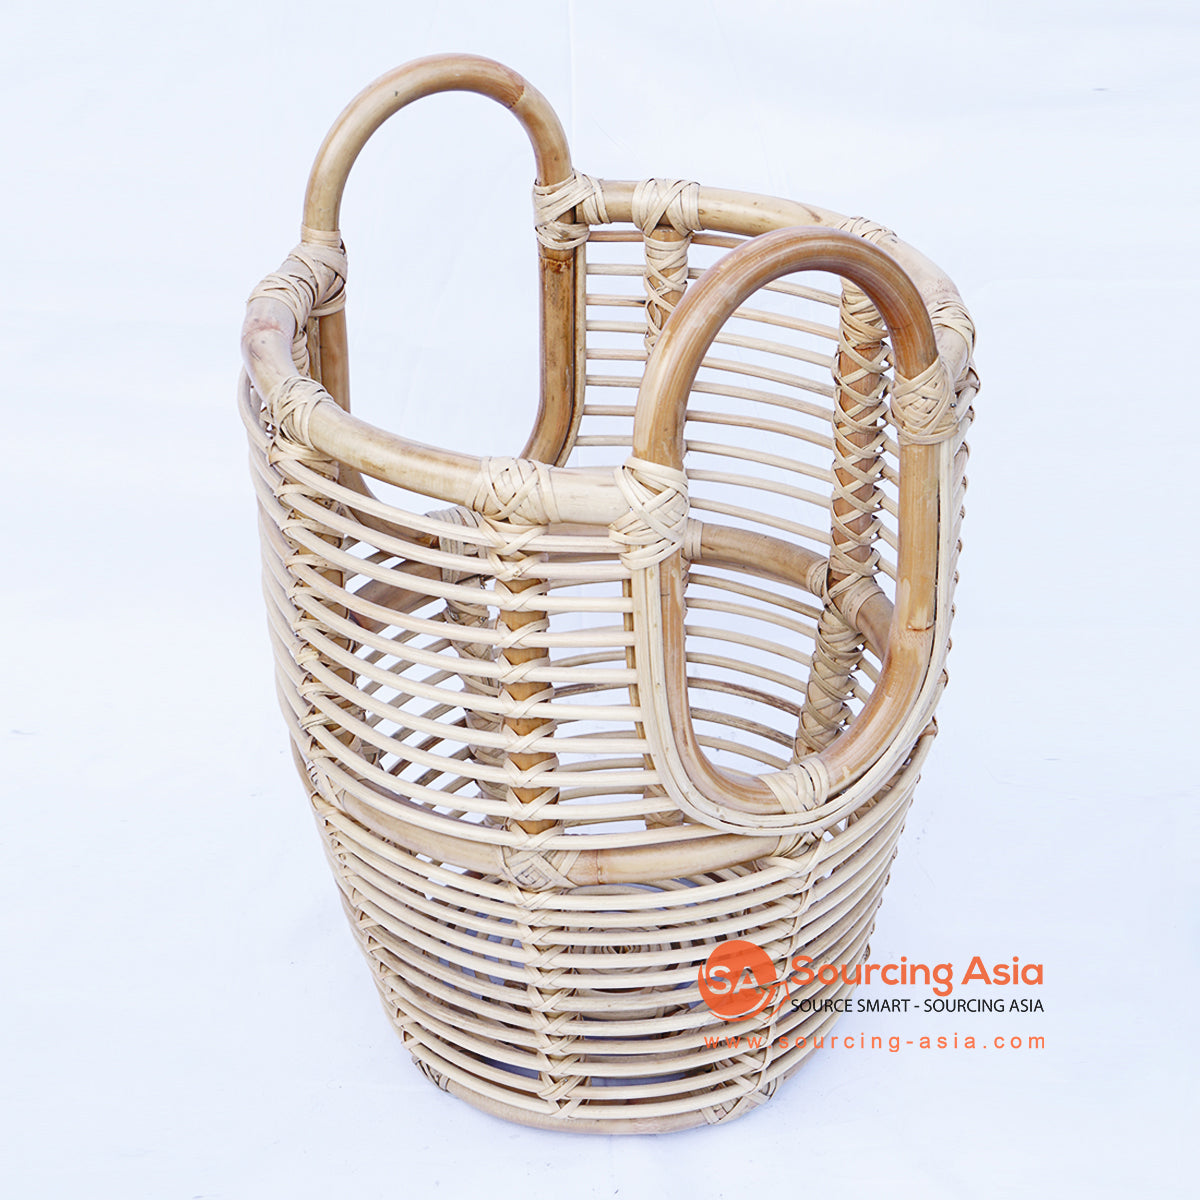 BNTC007-2 NATURAL RATTAN DECORATIVE GAPED BASKET WITH HANDLE